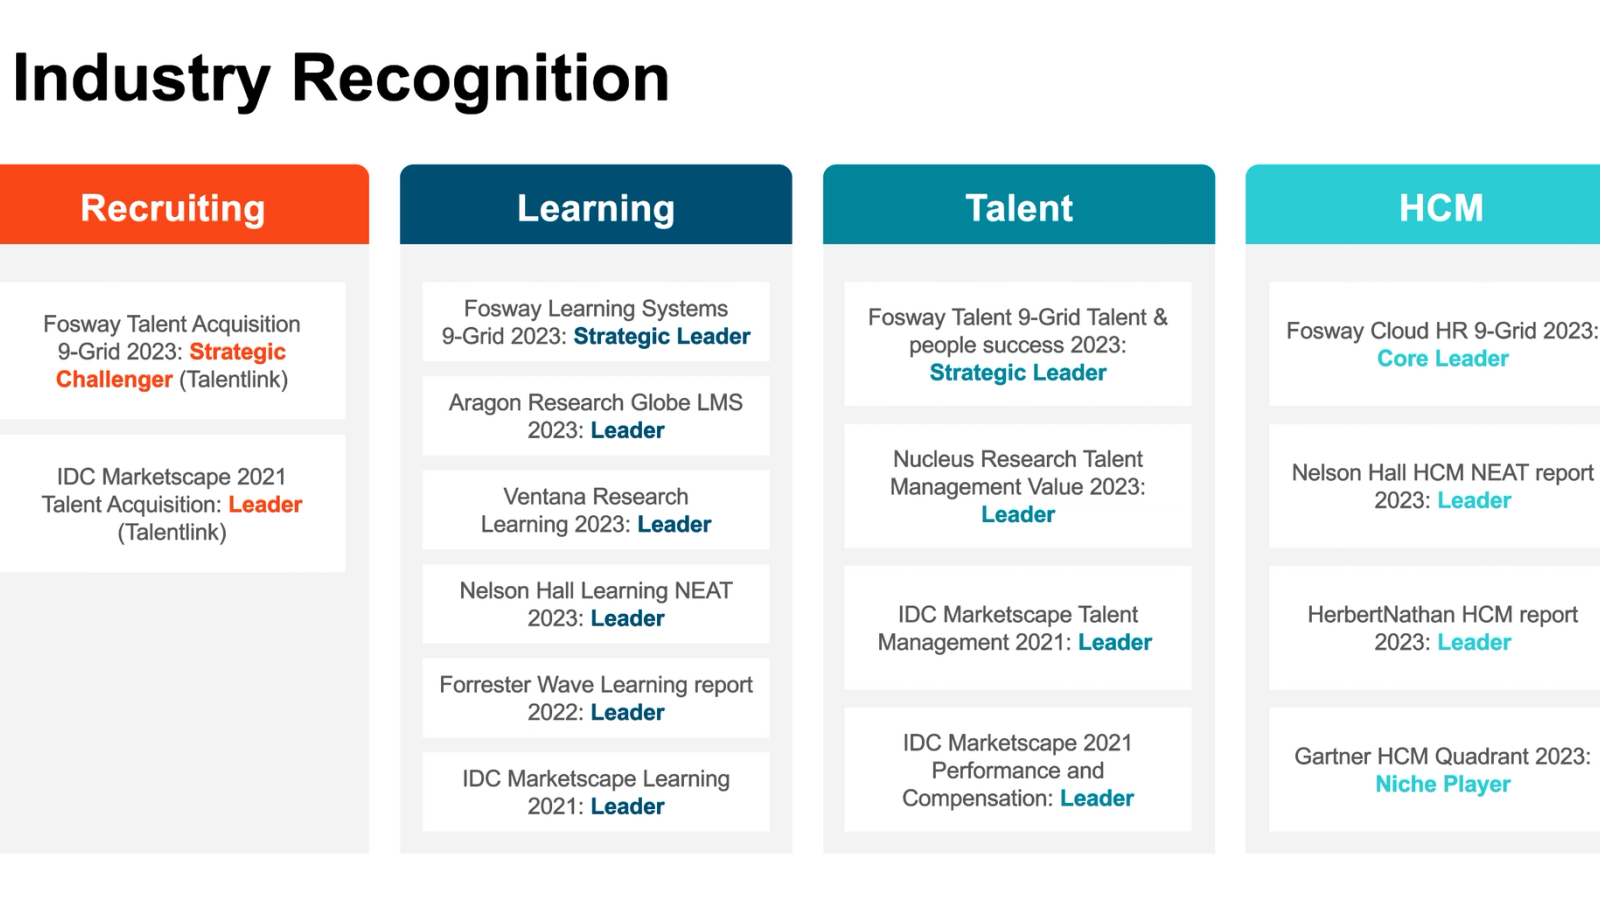 Analysts validate Cornerstone as a leader in recruiting, learning, talent and HCM